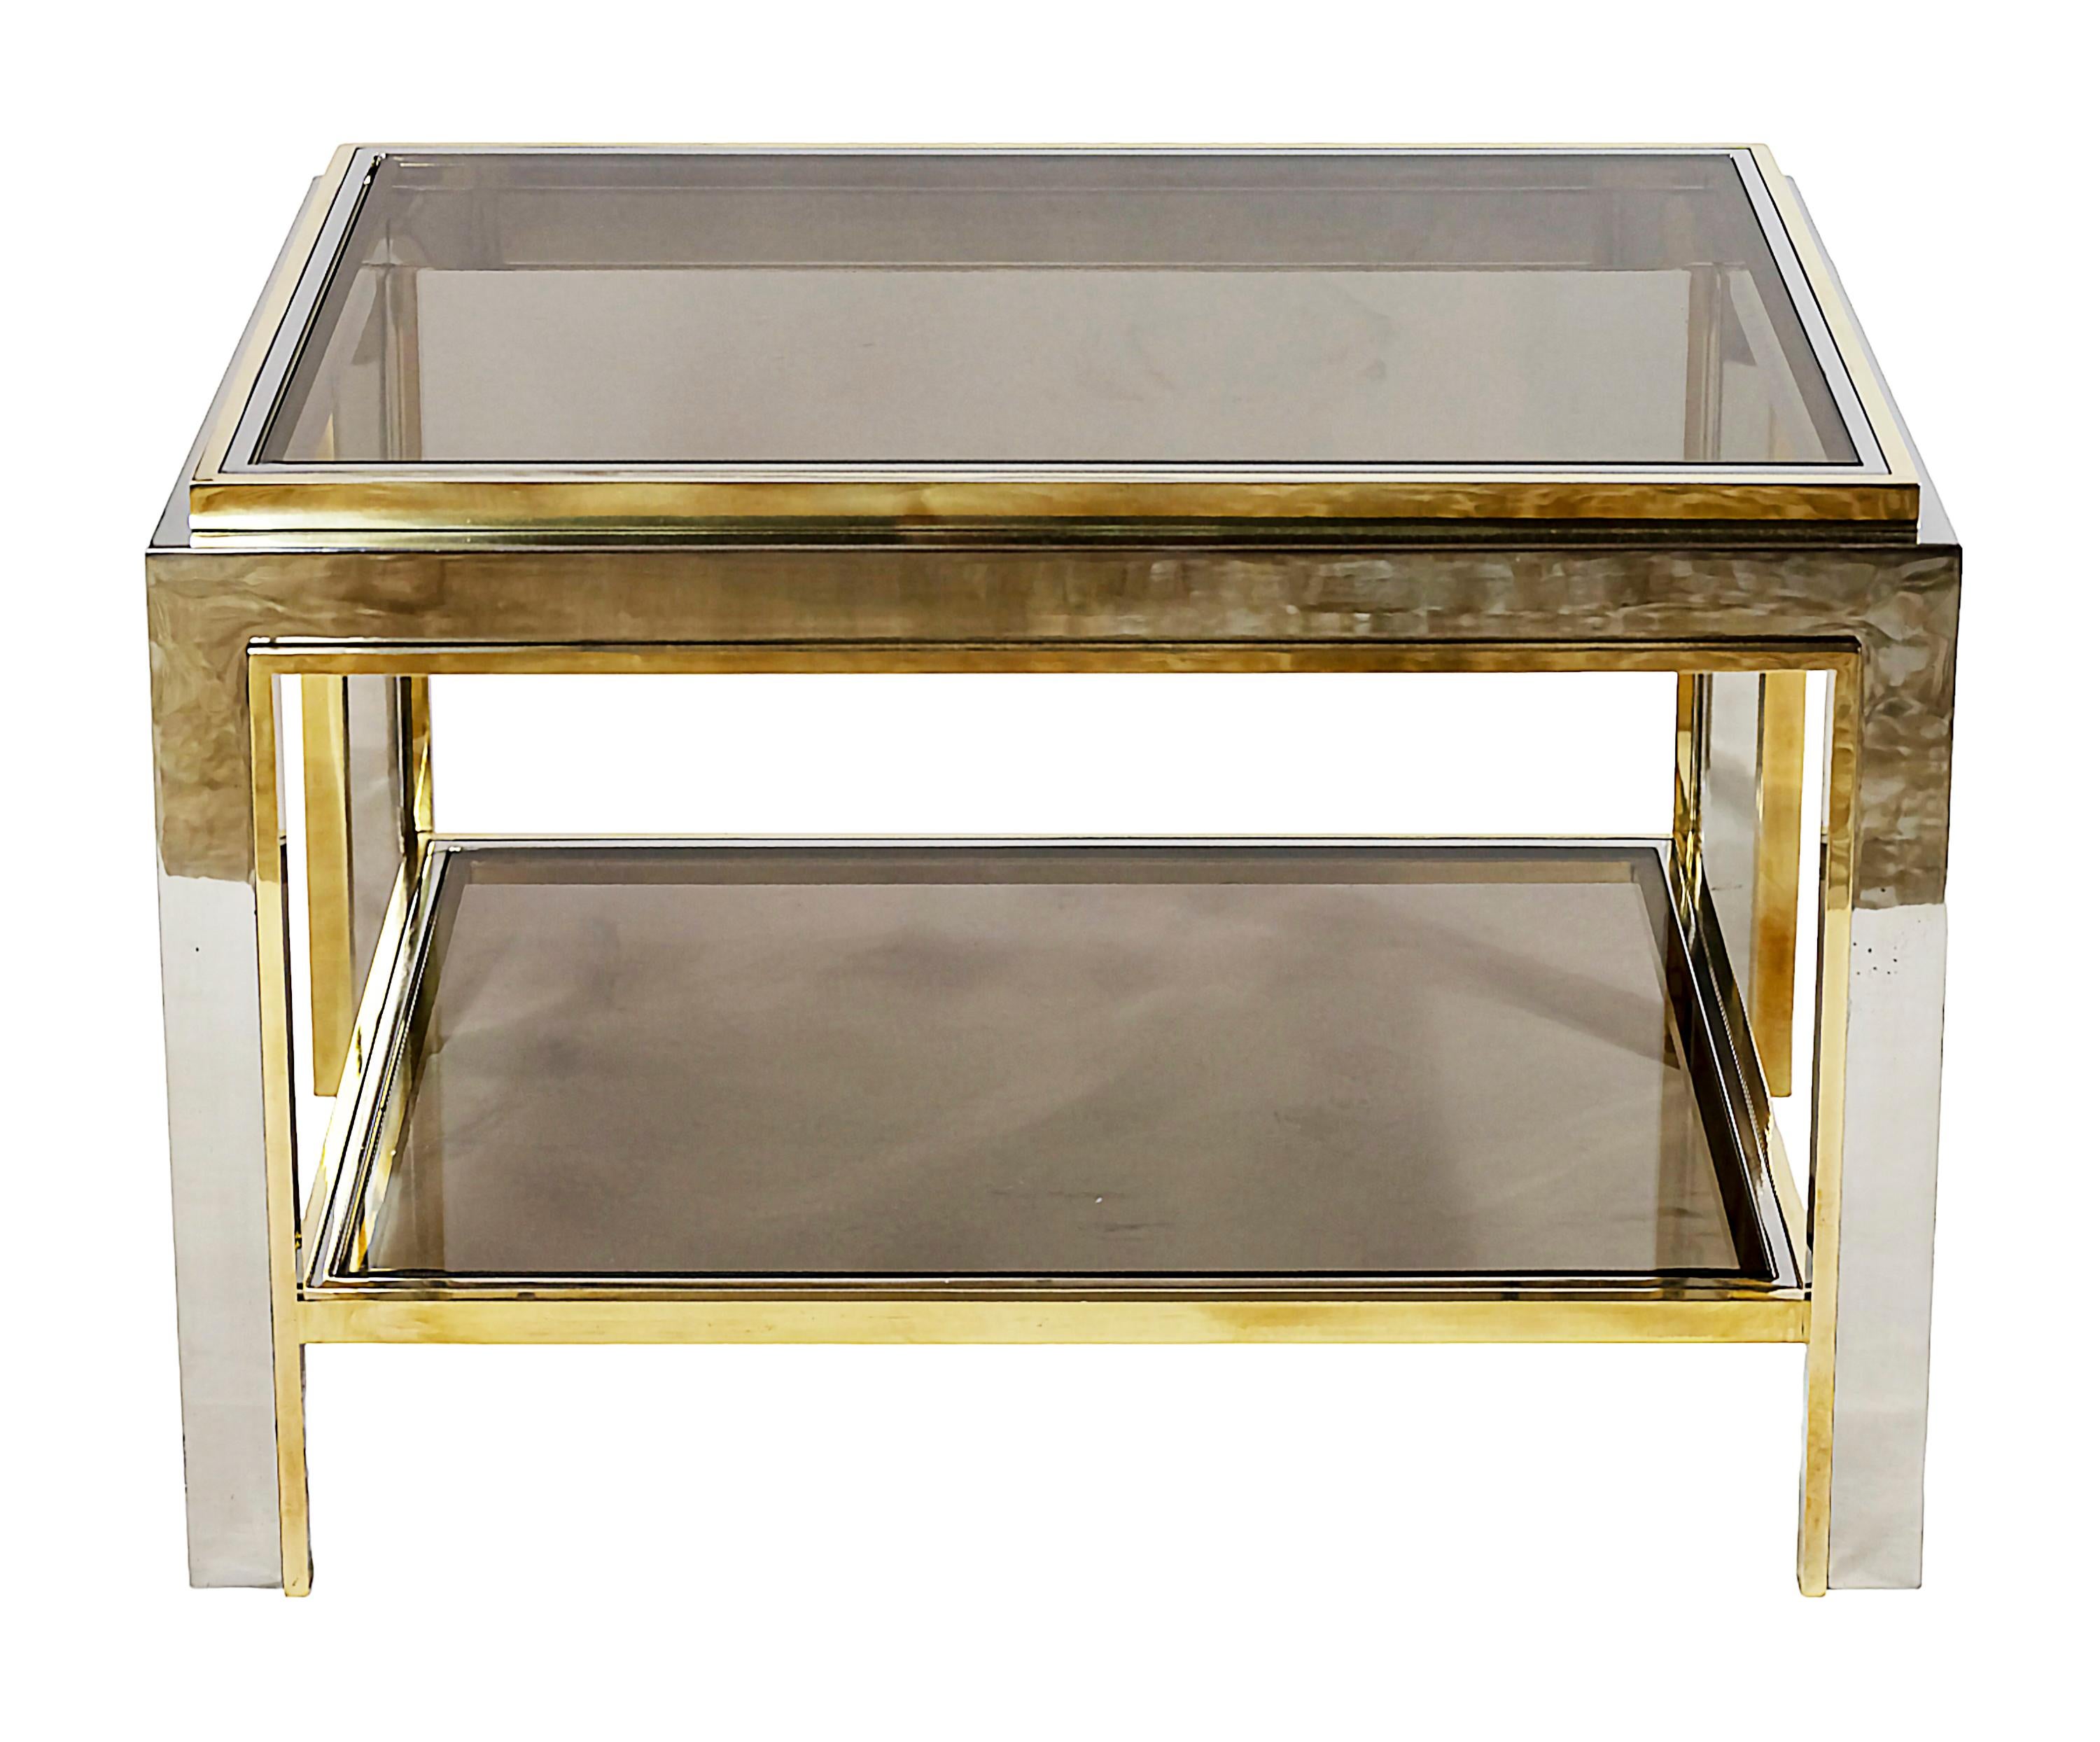 Pair of mid-century Italian side tables made of brass and chrome frame with smoked glass top and lower shelves.
Heavy and solid, very good condition.